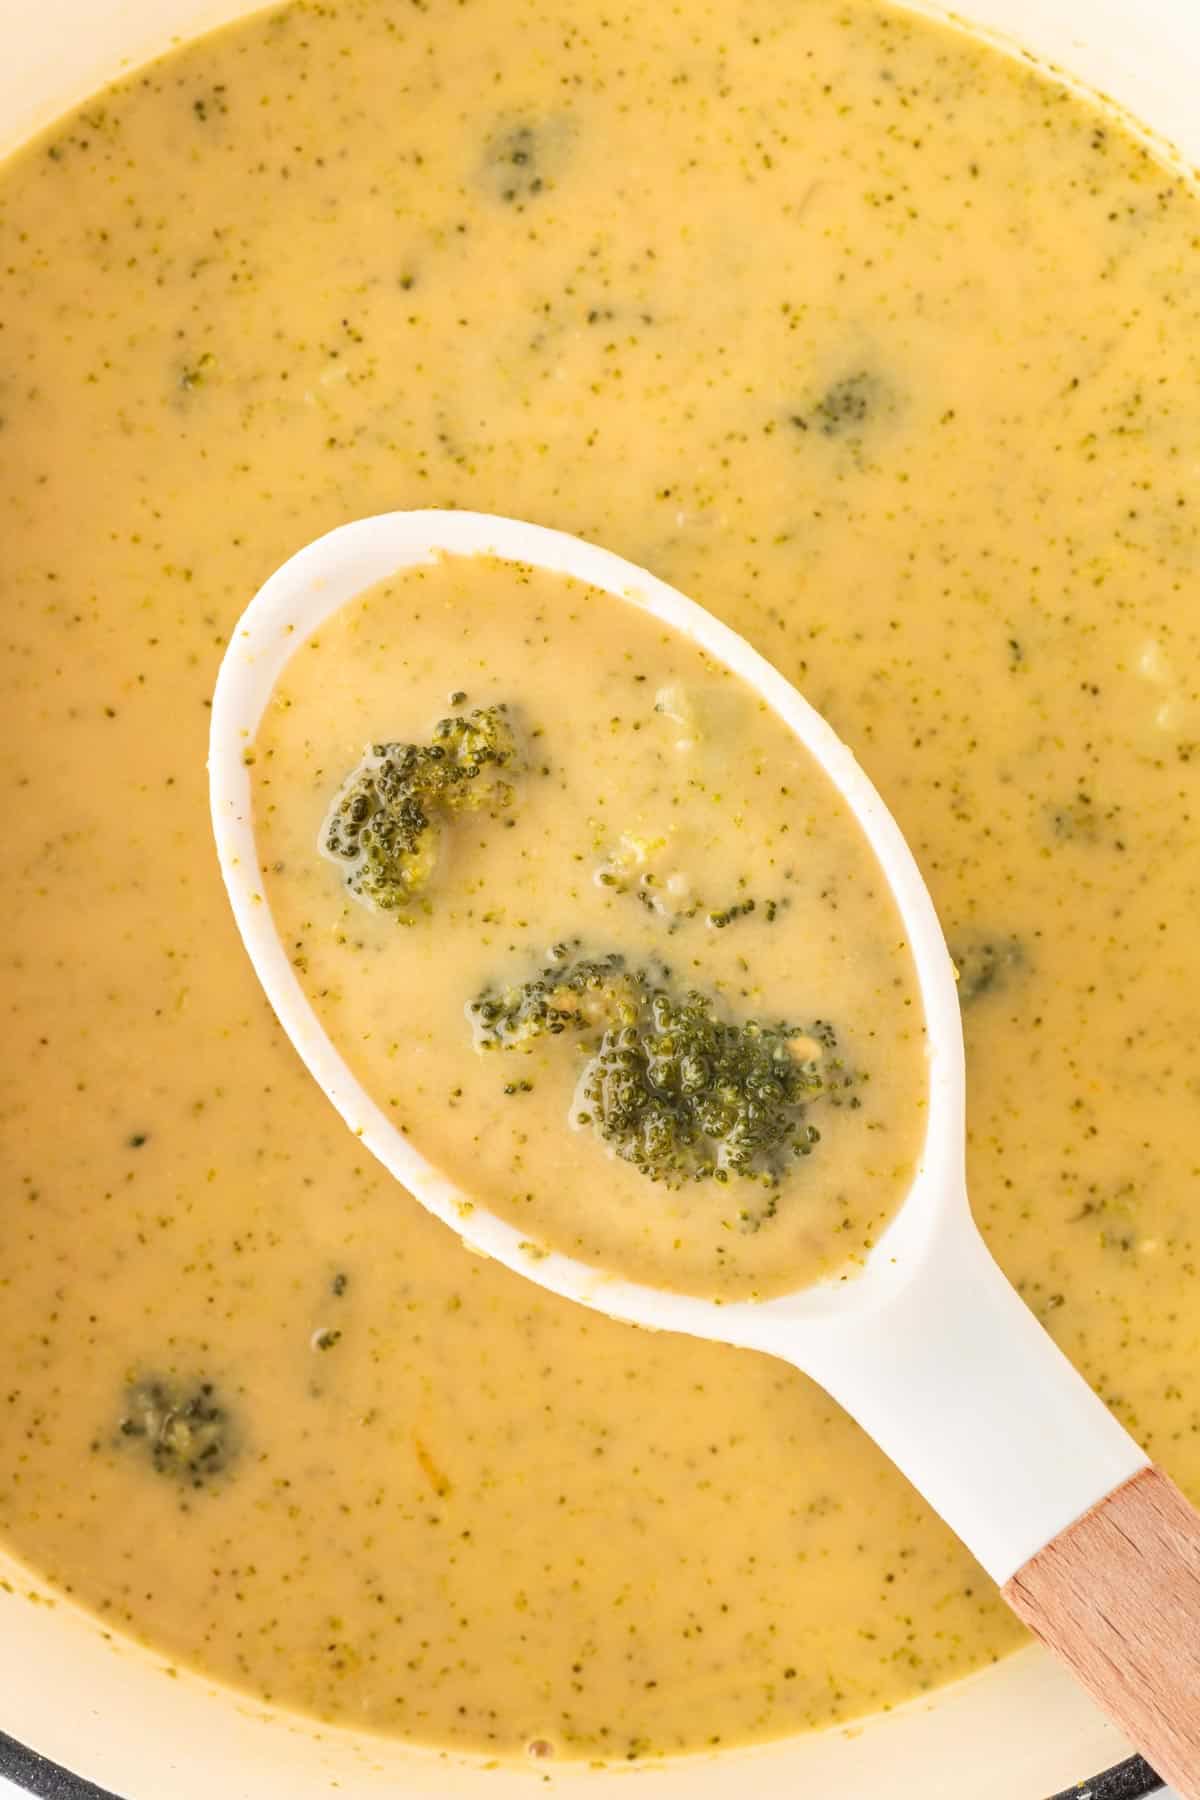 A photo of a spoon spatula holding a spoonful of broccoli cheese soup.